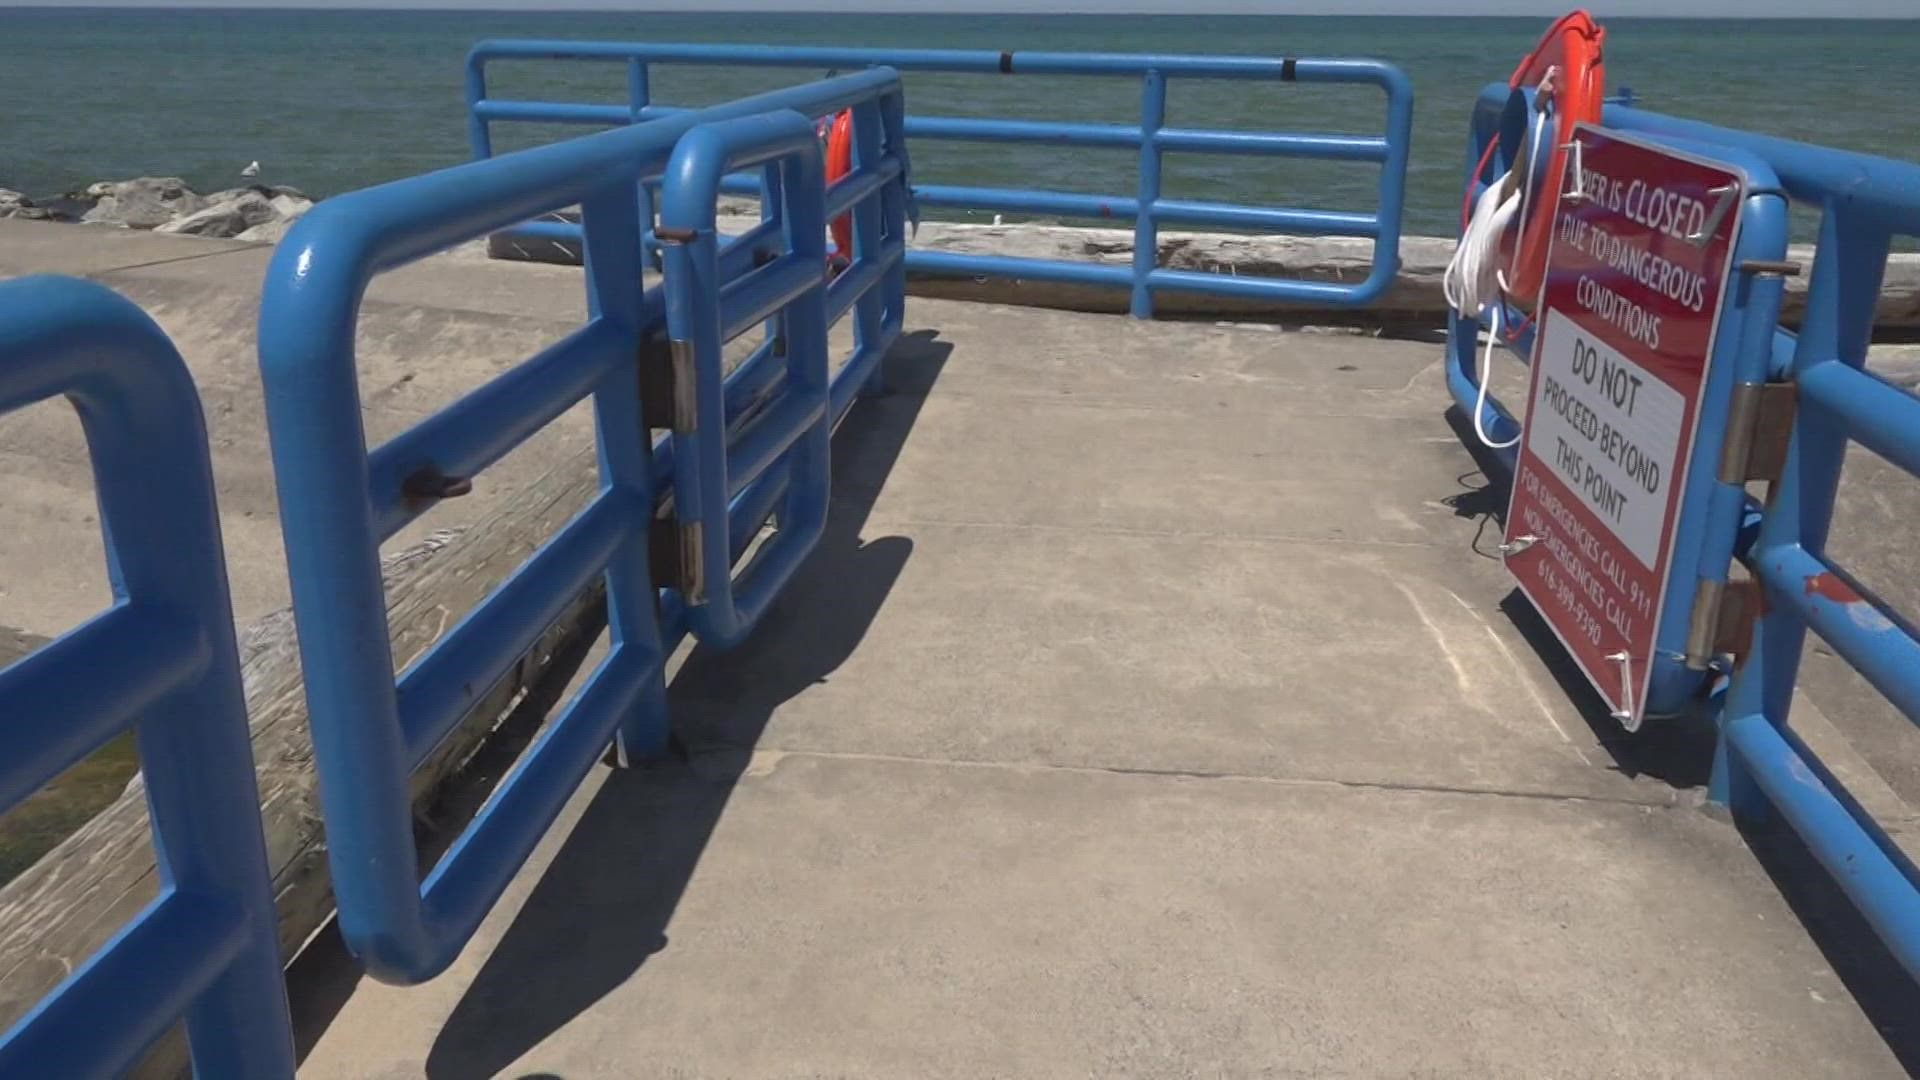 The measures aim to keep people out of the water during unsafe conditions. City council members say they're working to address concerns about the ordinances.